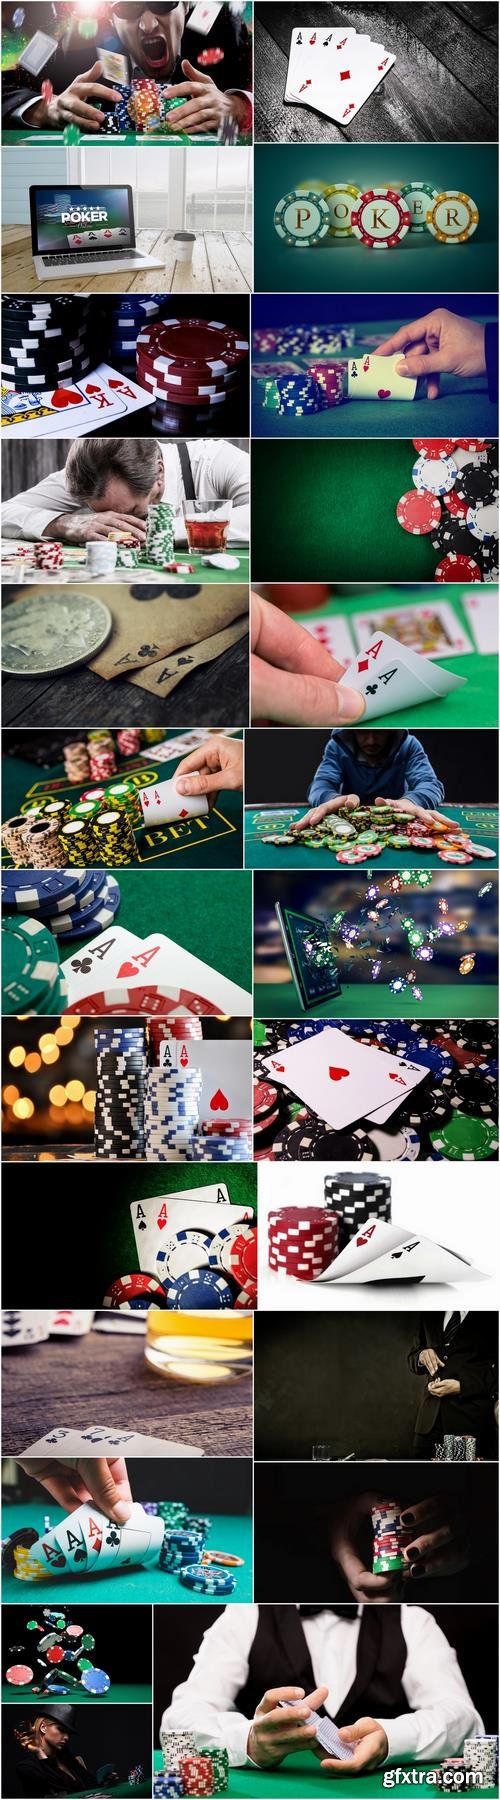 Playing cards poker royal flush payoff rate table games 25 HQ Jpeg